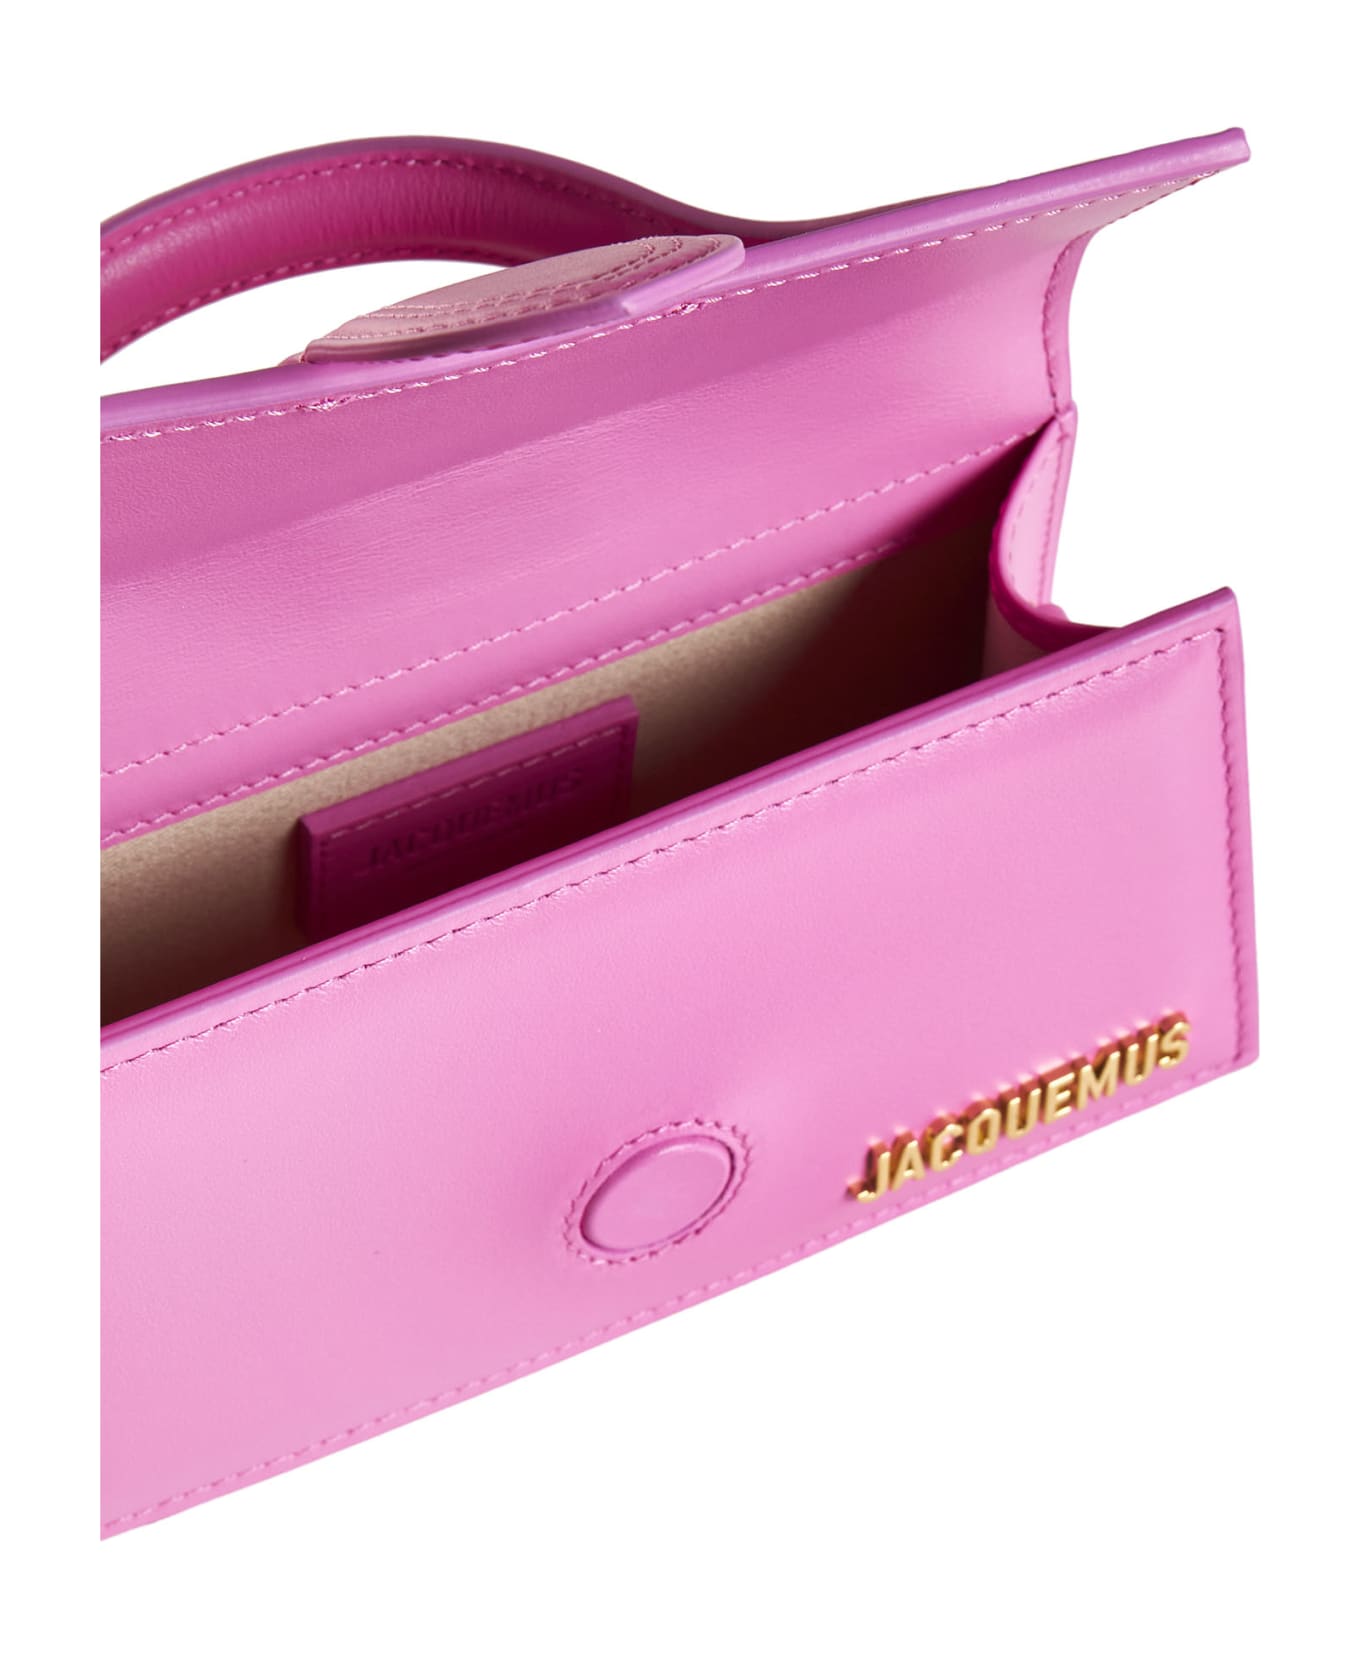 Jacquemus Le Bambino Leather Top Handle Bag - Neon pink